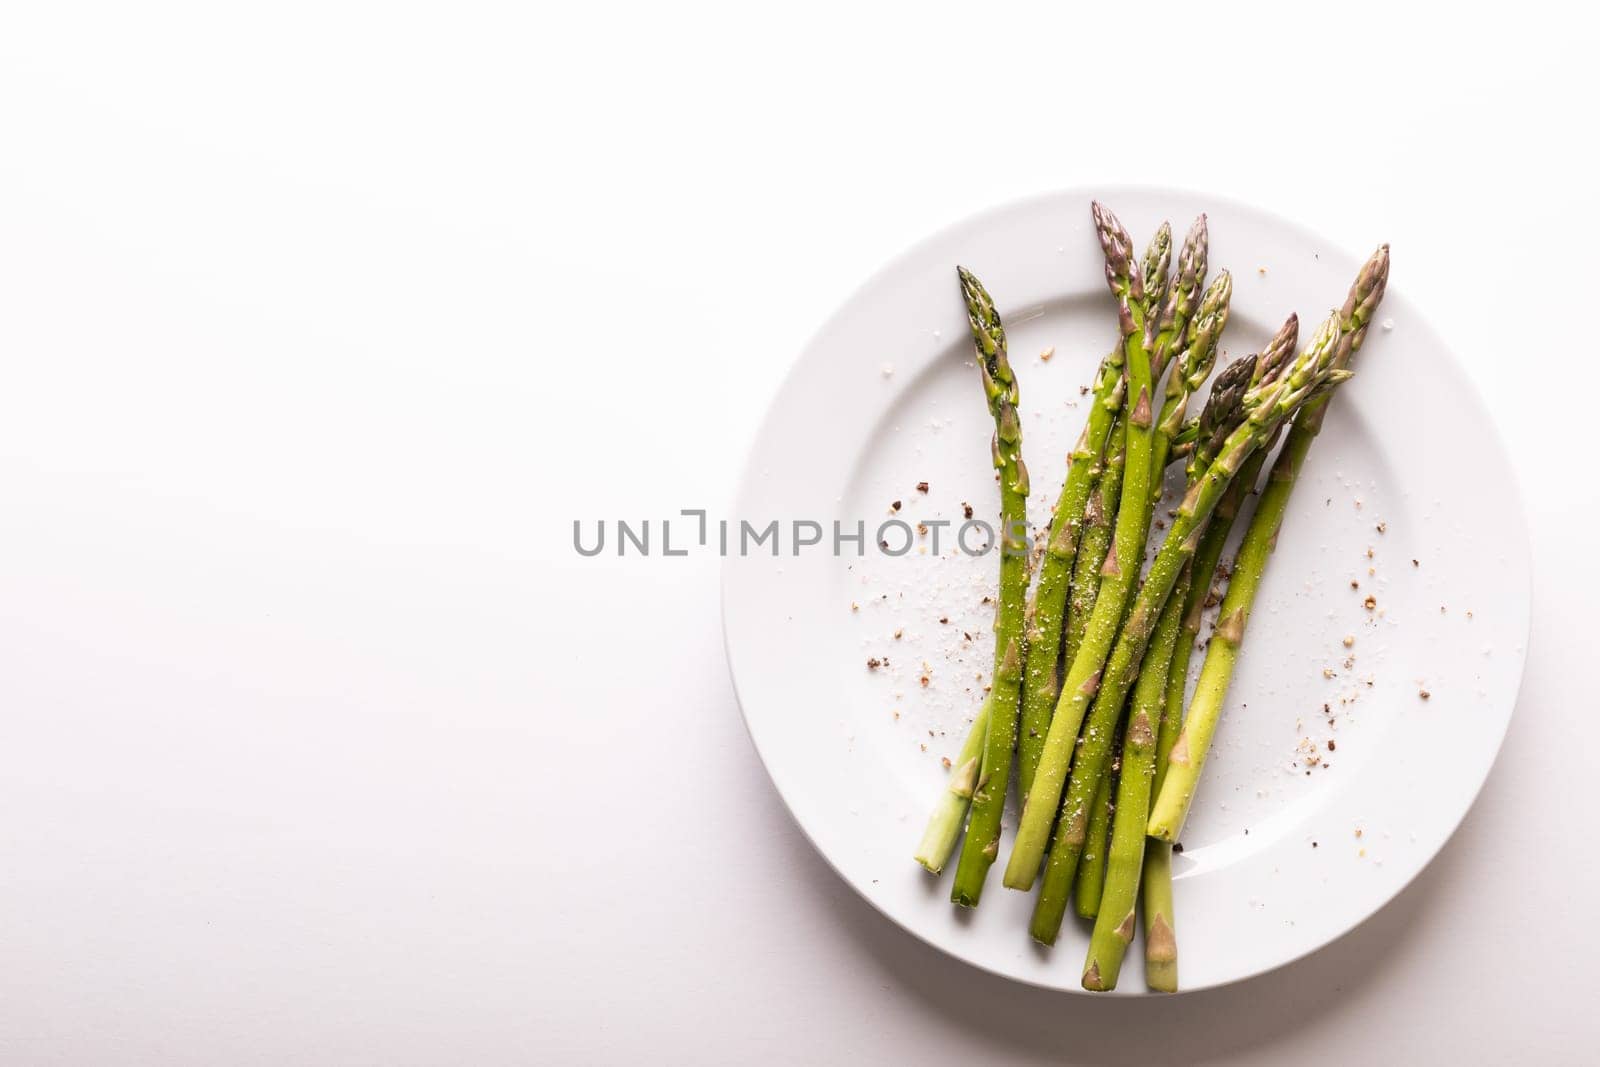 Overhead view of asparagus and seasoning in plate by copy space against white background. unaltered, food, healthy eating and organic concept.